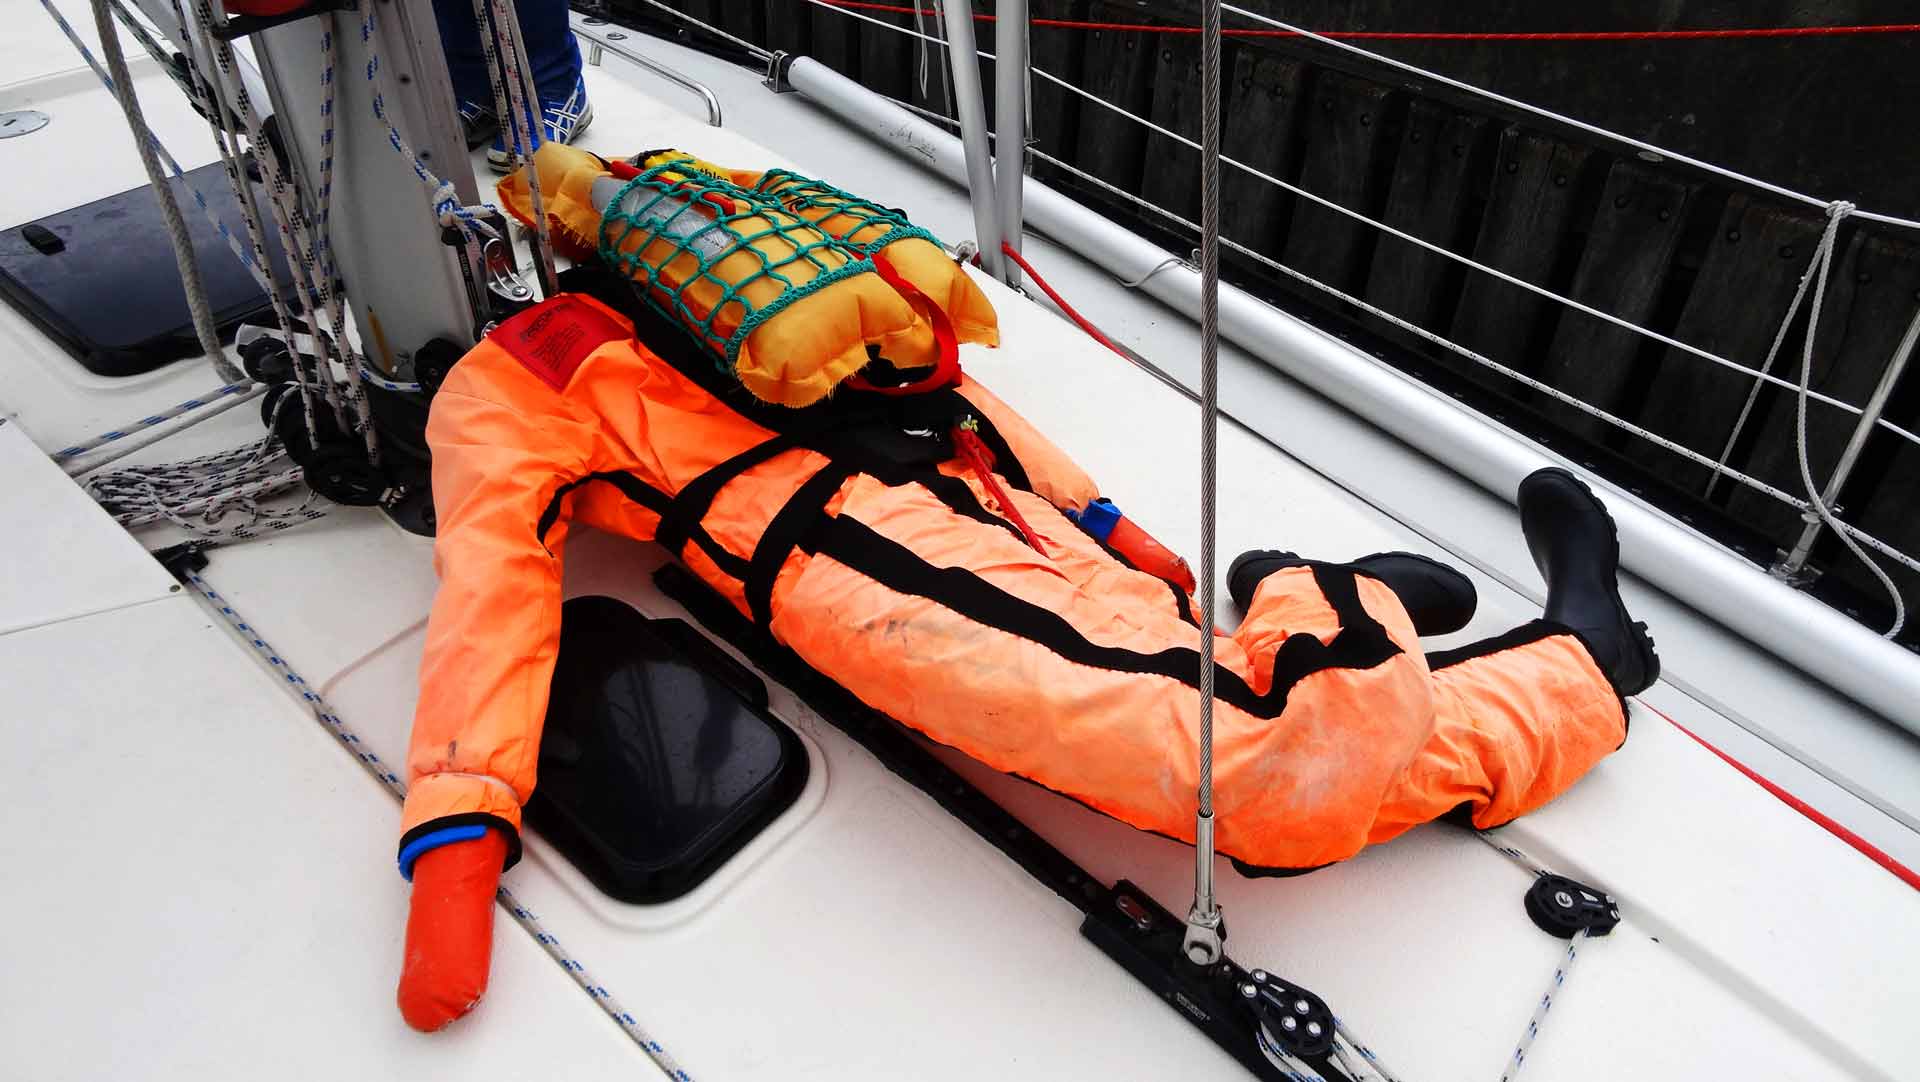 Karl weighs 50+ Kilograms and will act as Crew Overboard-Dummy